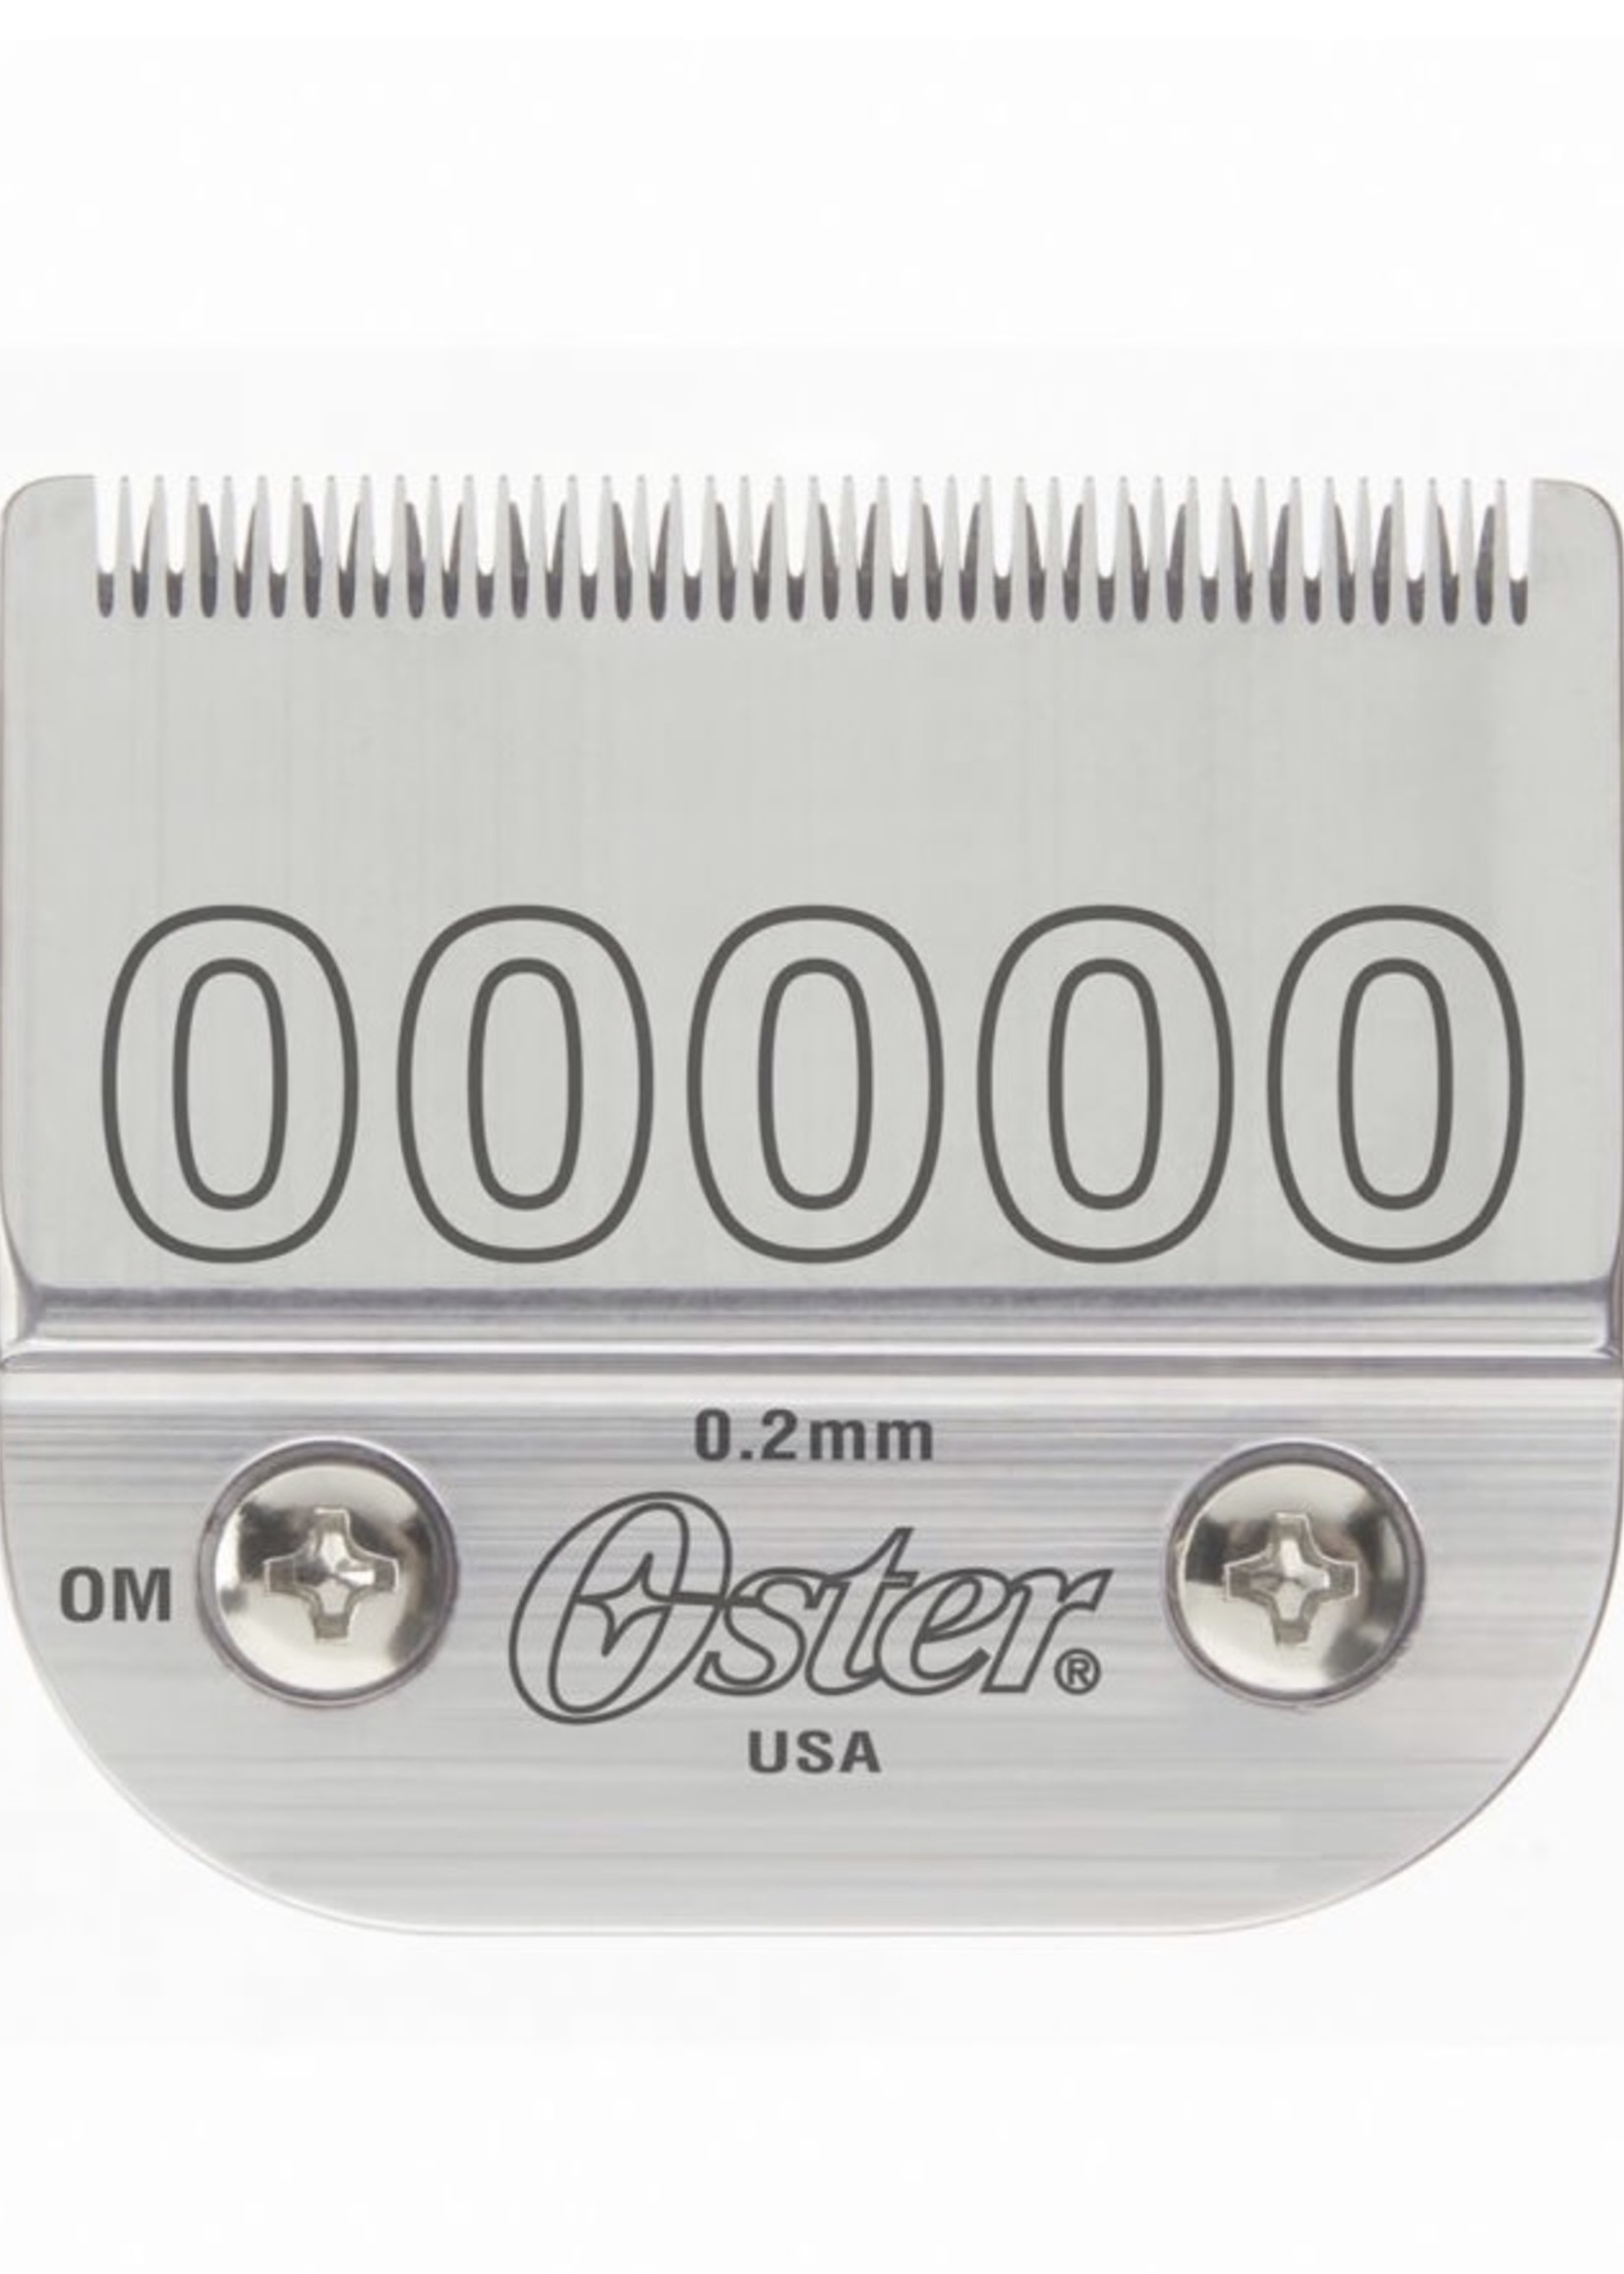 Oster Oster Detachable Blade 00000